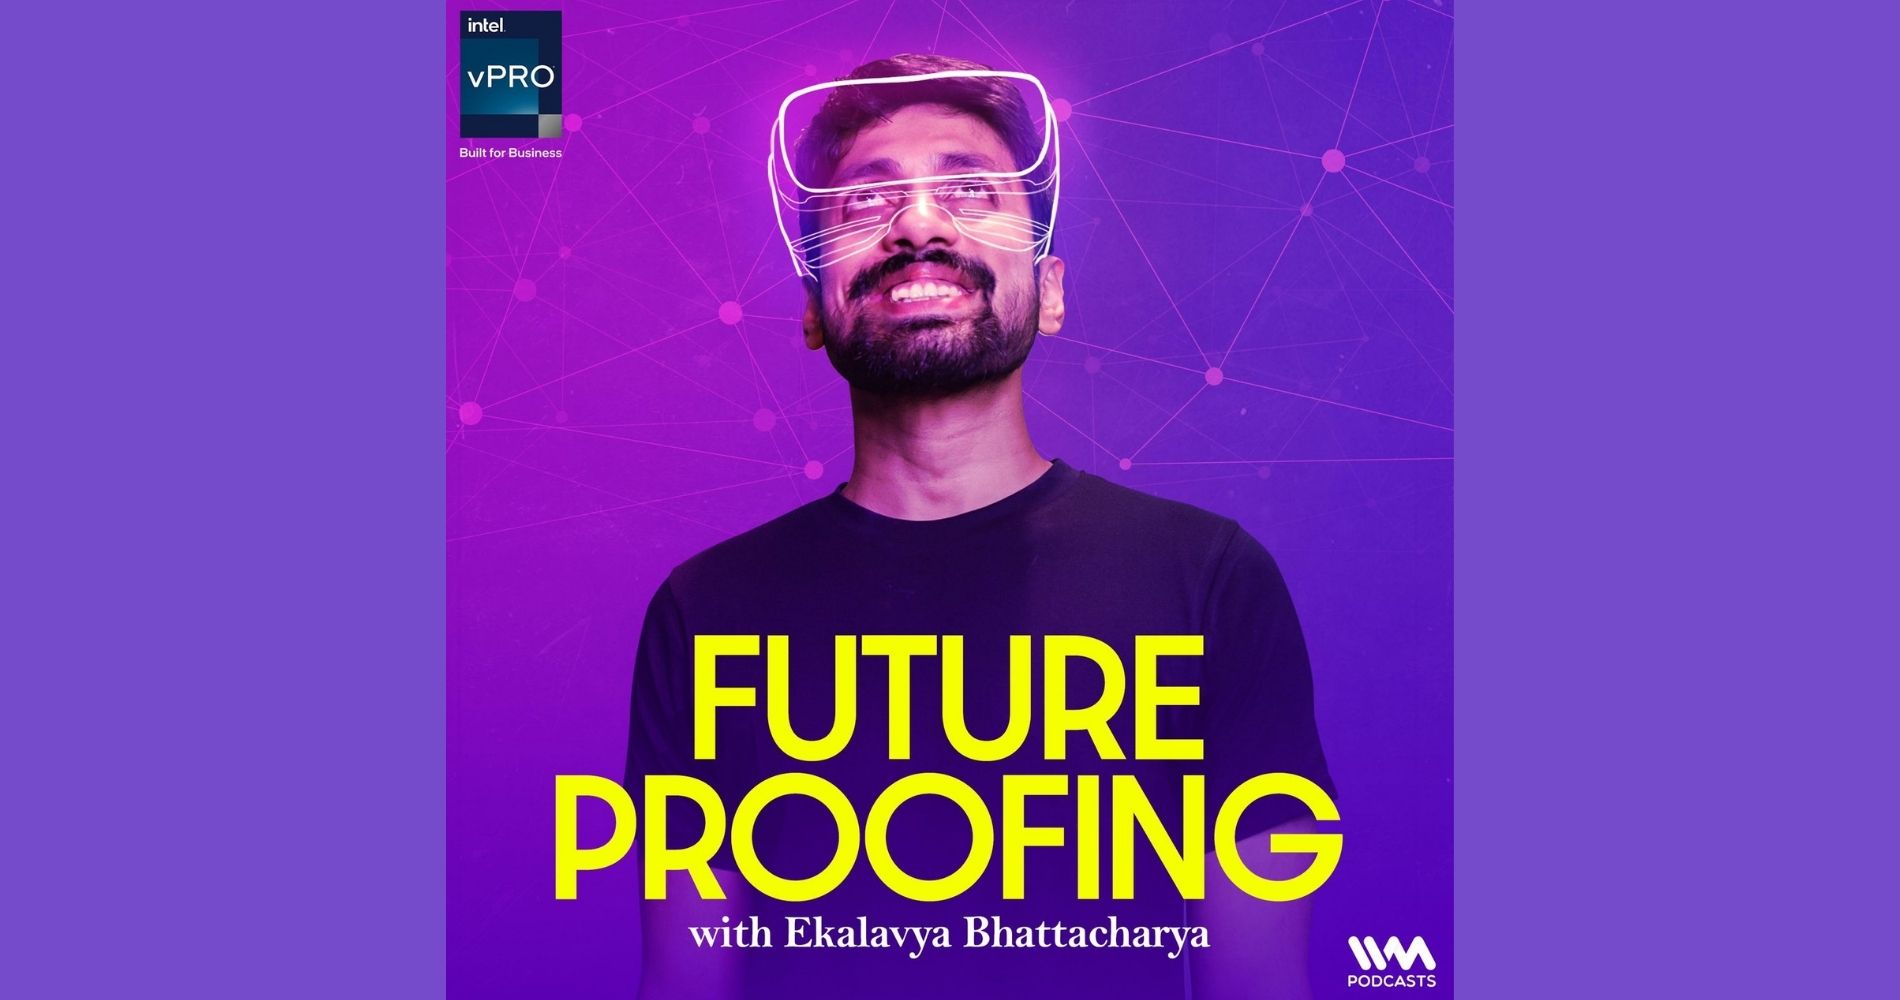 IVM Podcasts launches ‘Future Proofing with Ekalavya Bhattacharya’